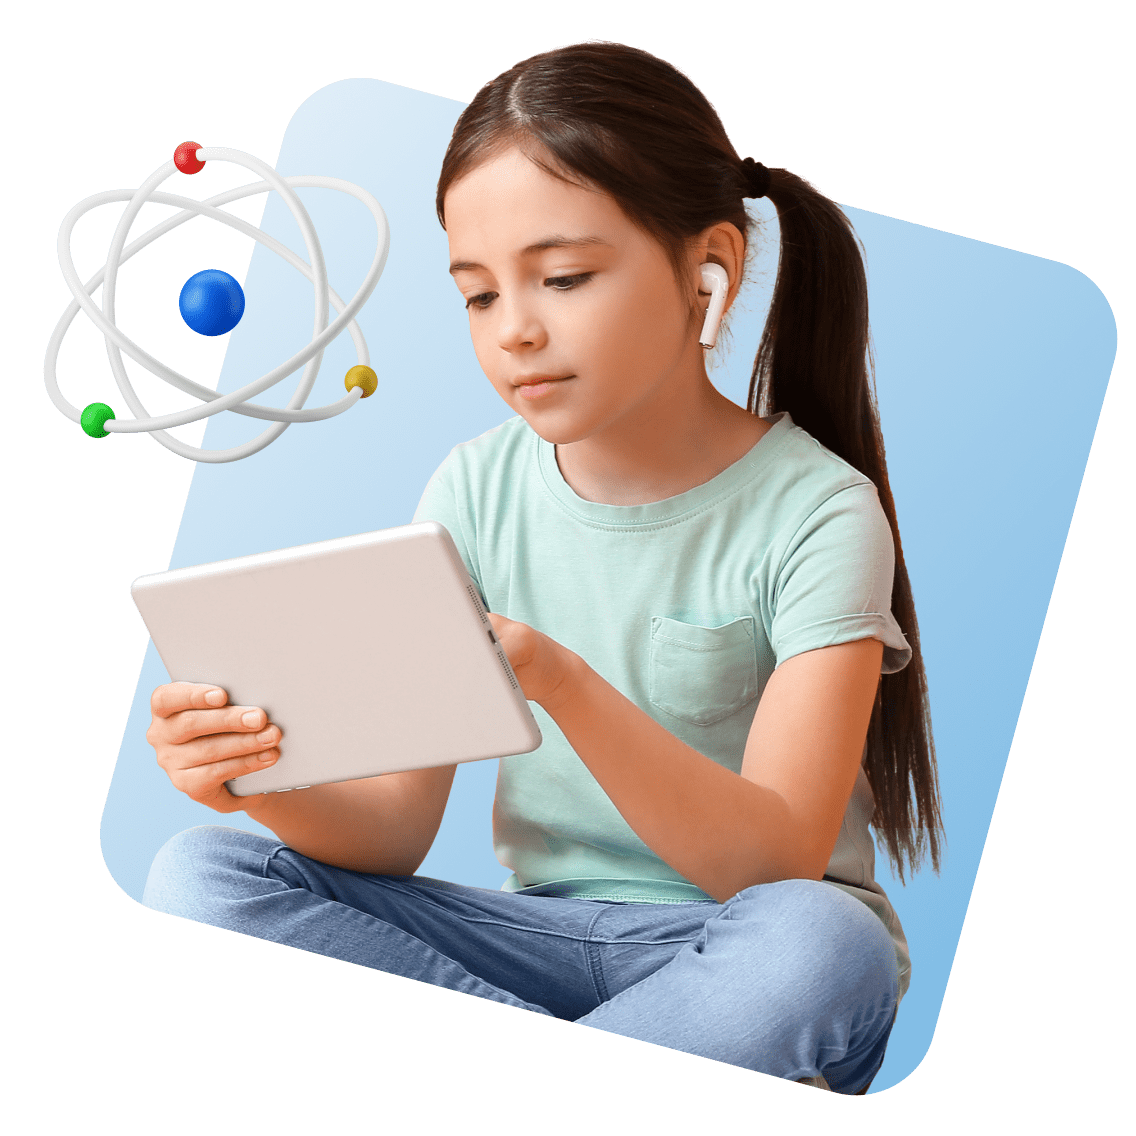 A variety of courses tailored to each student’s needs. image 3 (name 3 Young Girl Tablet Airpods Science)